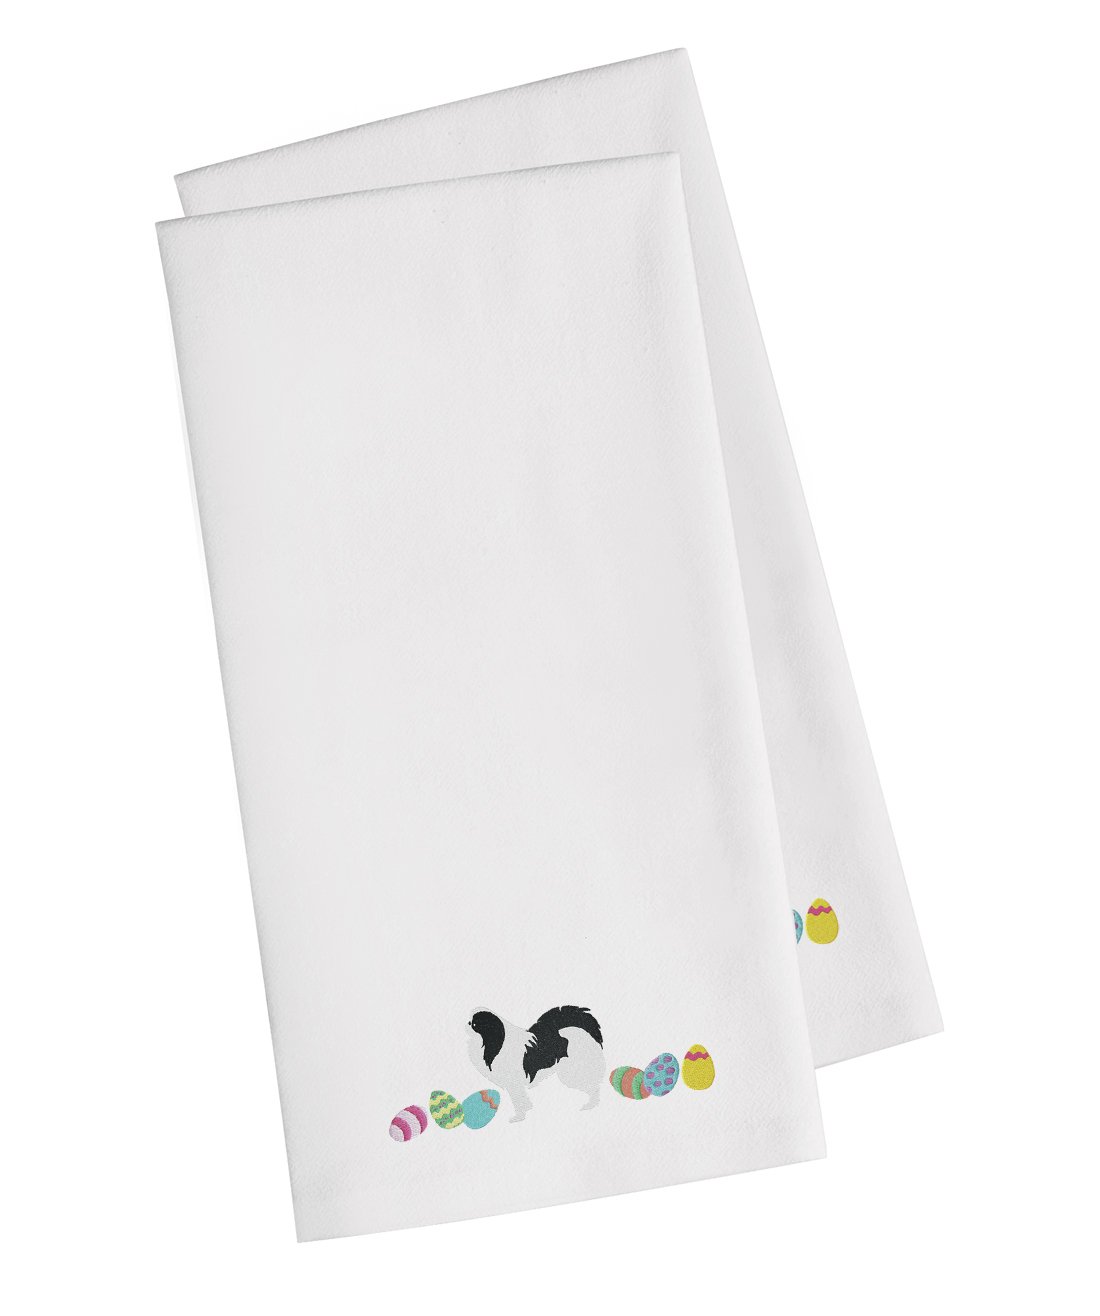 Japanese Chin Easter White Embroidered Kitchen Towel Set of 2 CK1658WHTWE by Caroline's Treasures